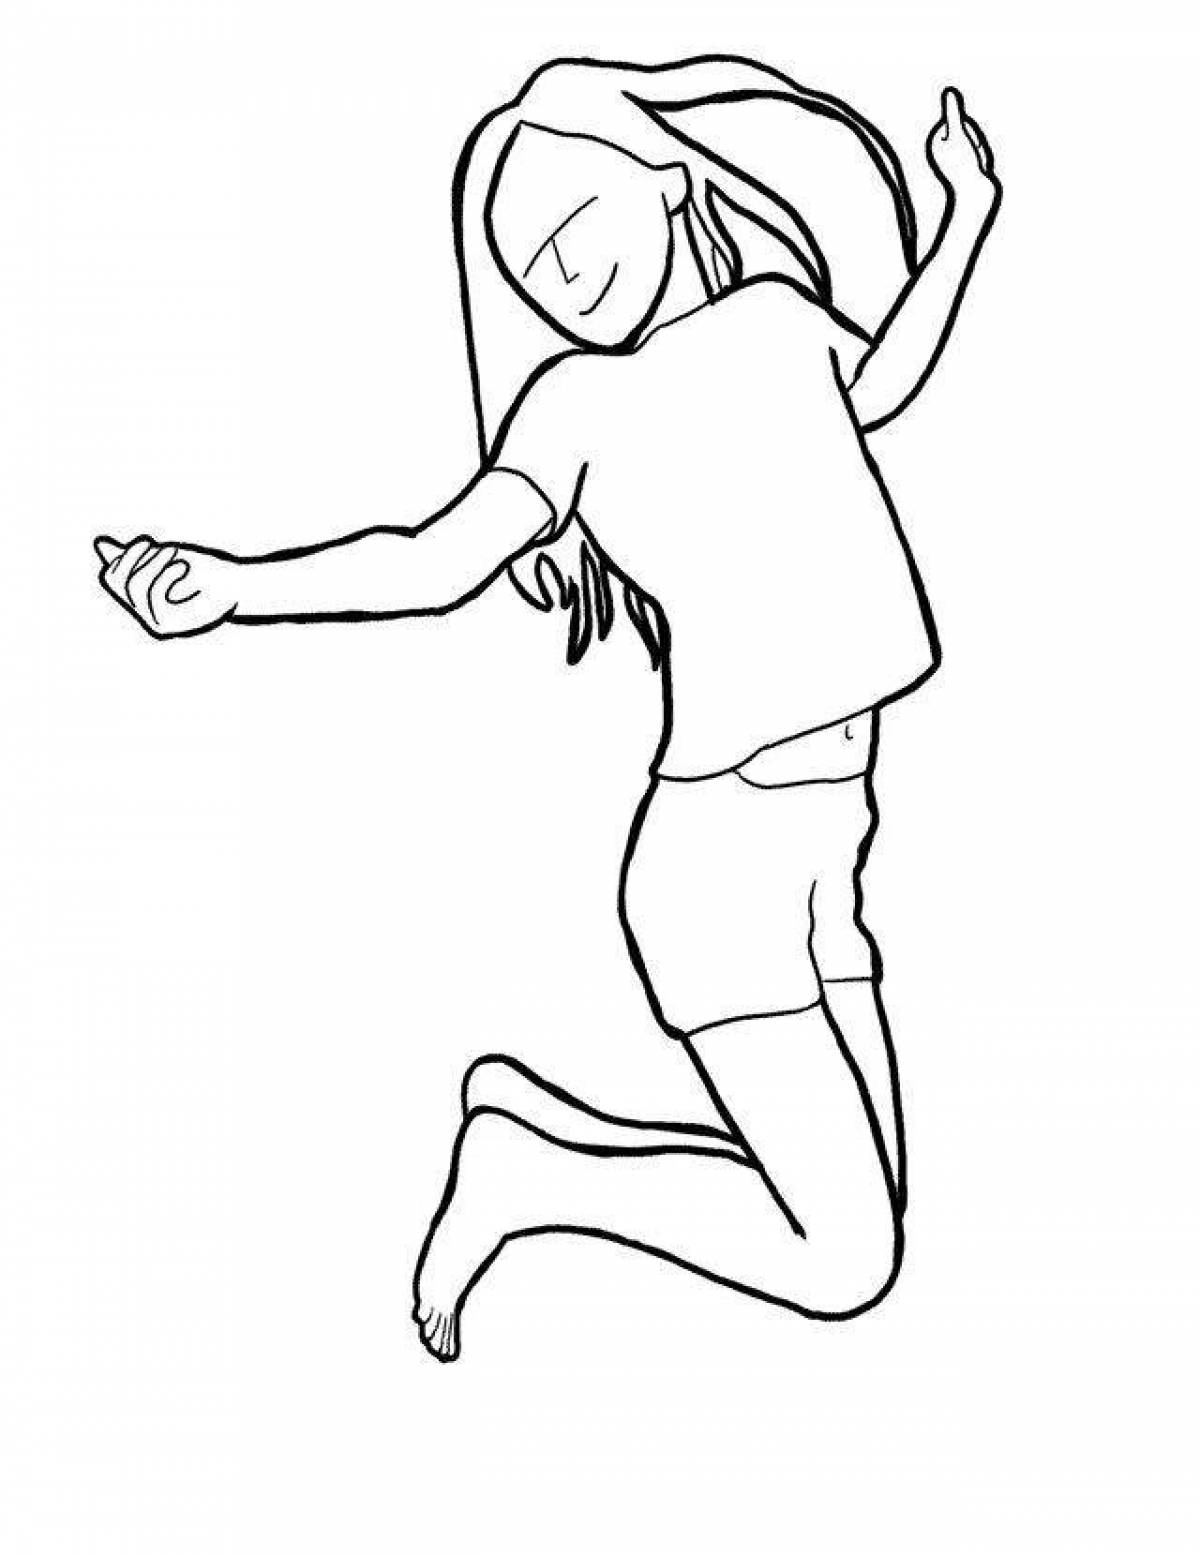 Radiant poses coloring page